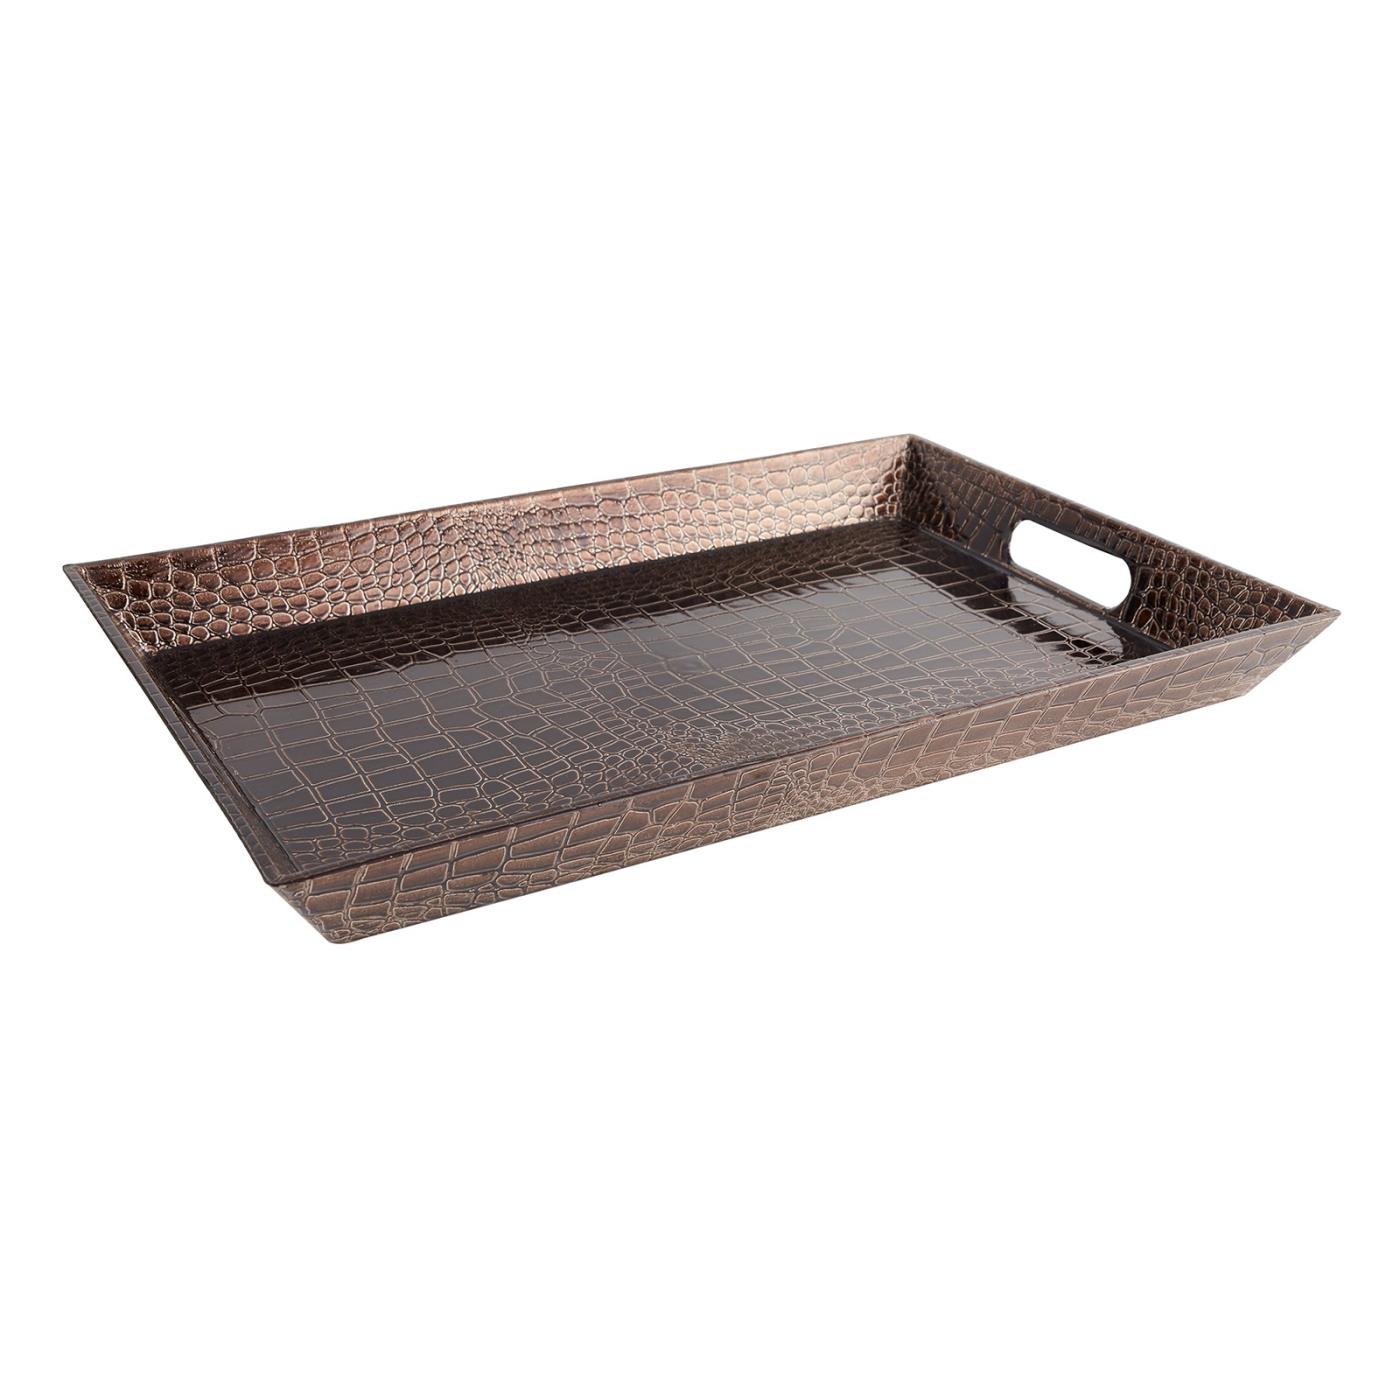 Brown Gator Lacquer Tray - 18"x12"